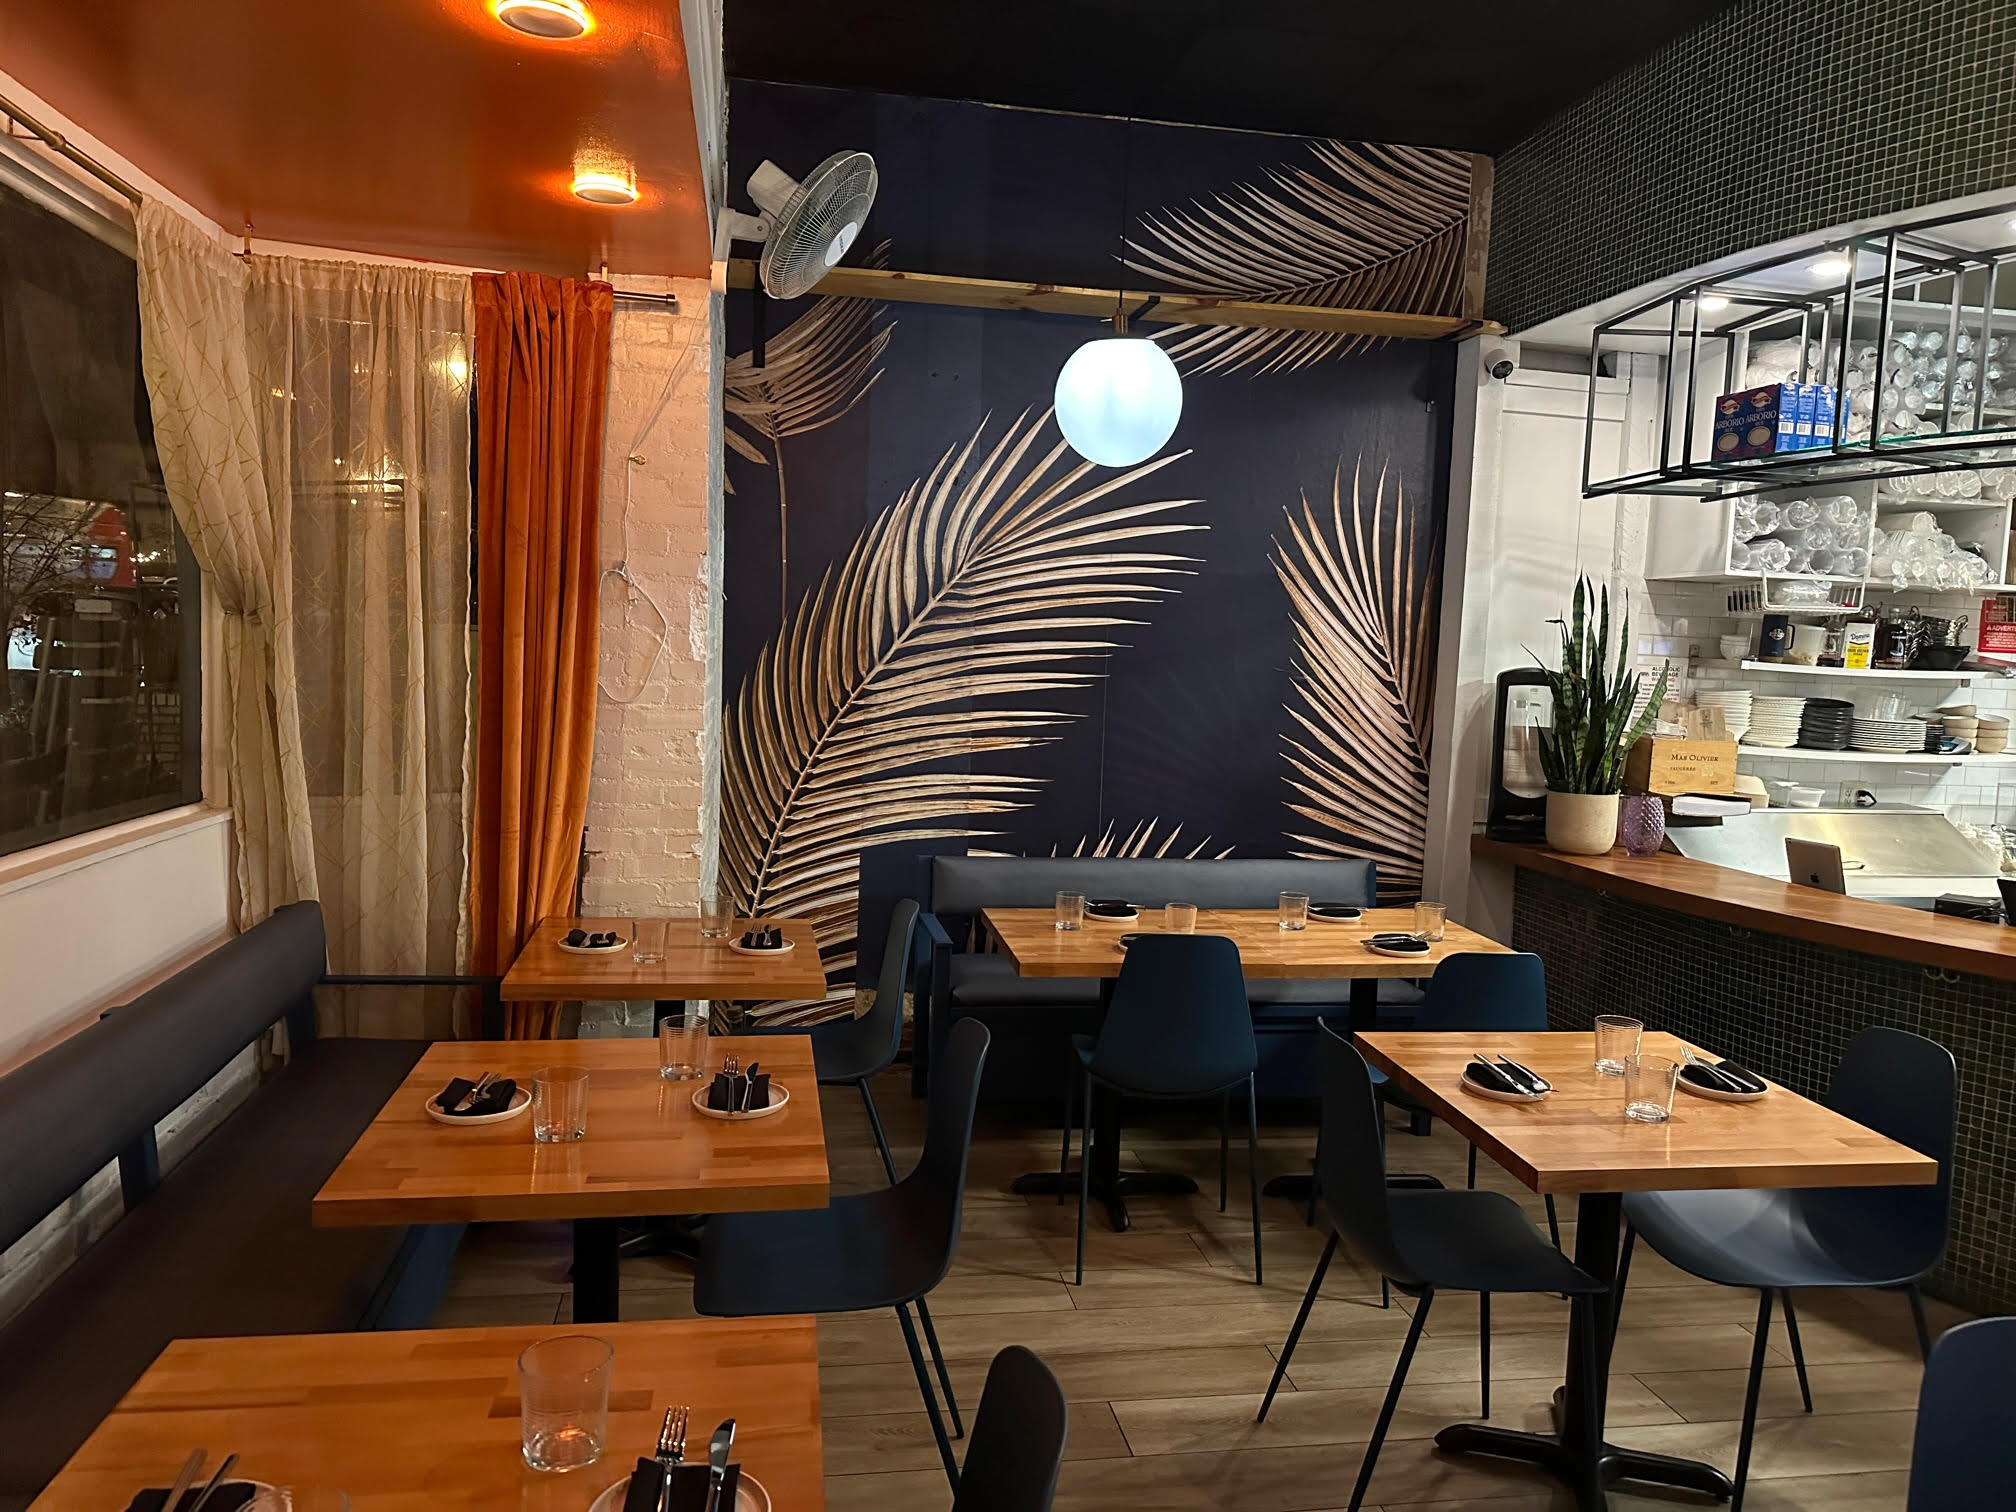 Afro-Fusion Restaurant Almeda Opens Serving Jollof Risotto and Fried Catfish  With Spaghetti